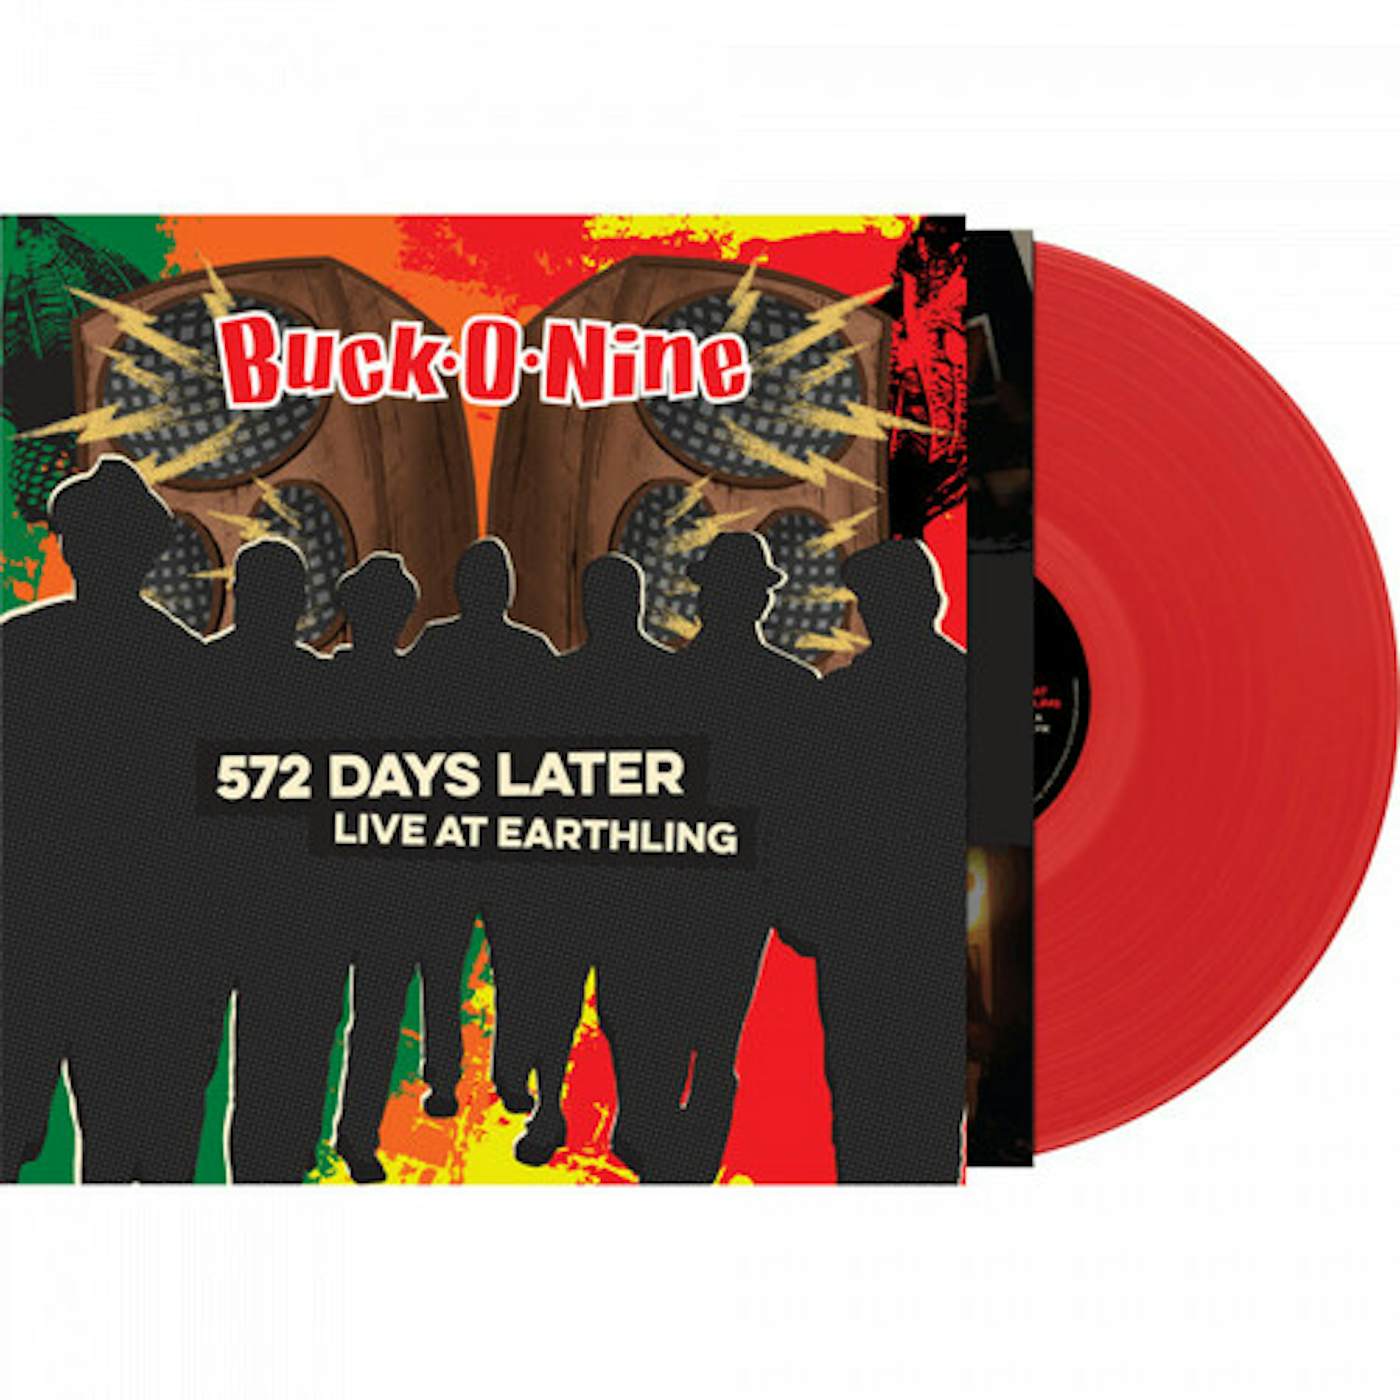 Buck-O-Nine 572 DAYS LATER - LIVE AT EARTHLING - RED Vinyl Record